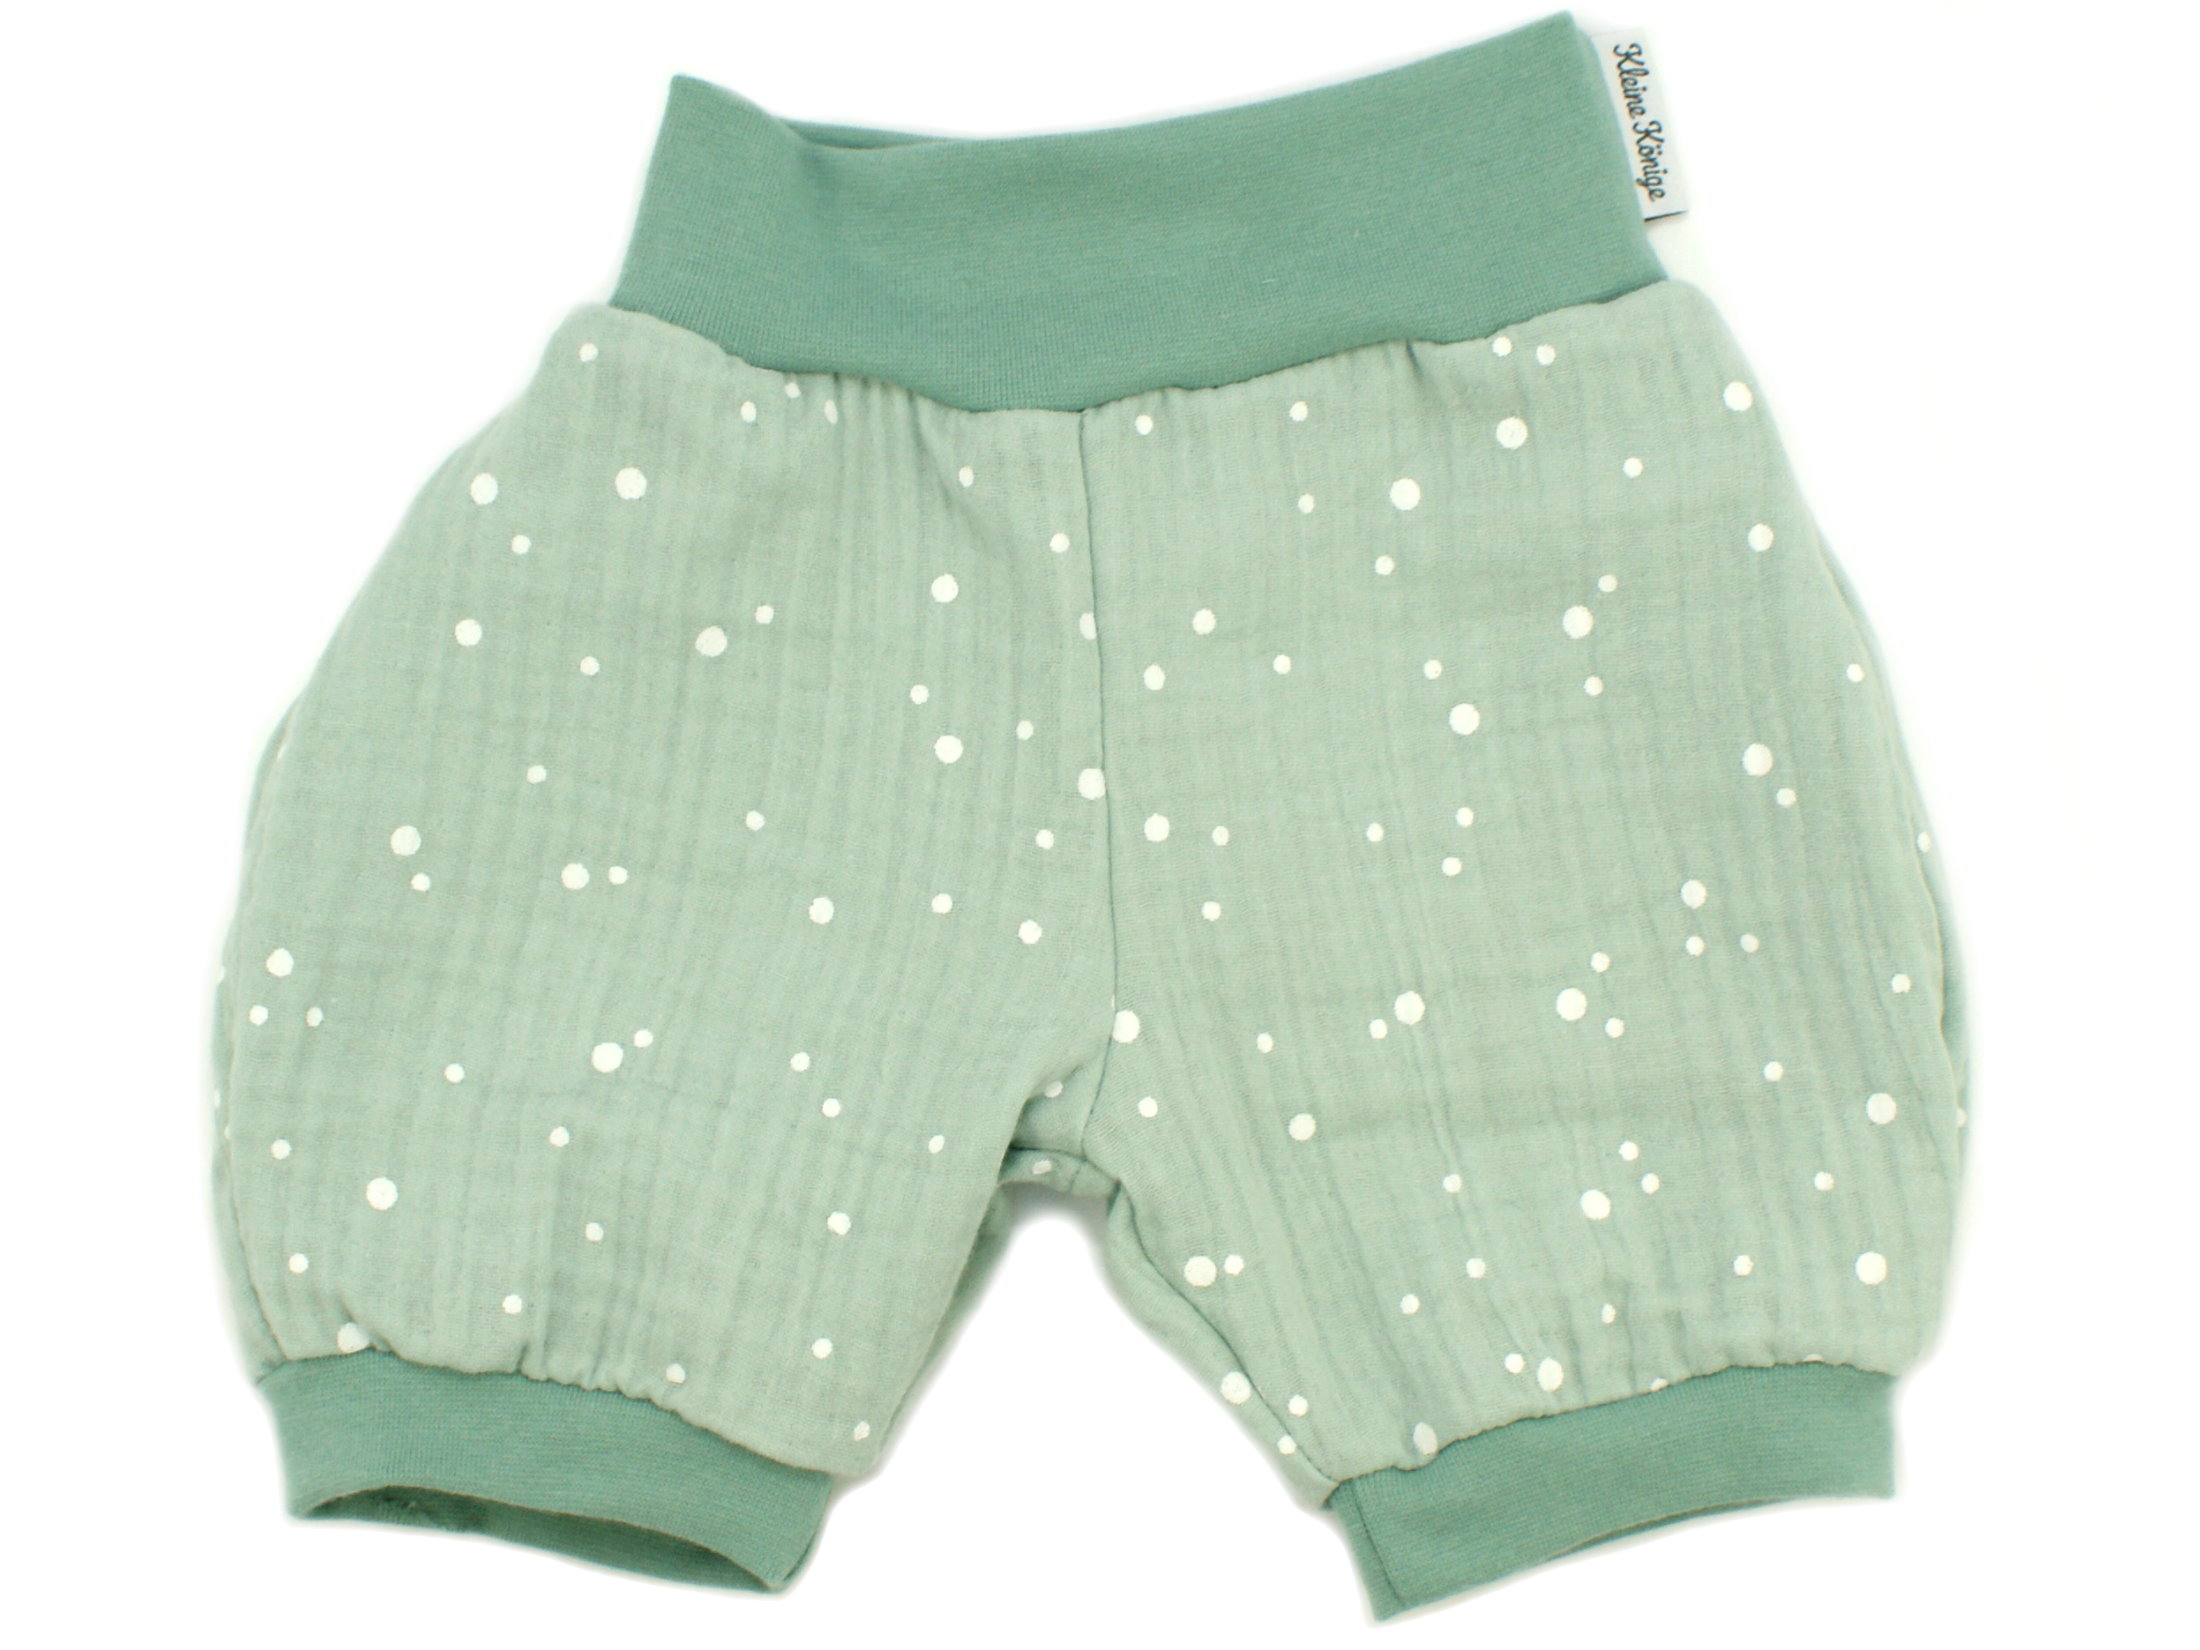 Musselin Kinder Shorts "White Dots" mint